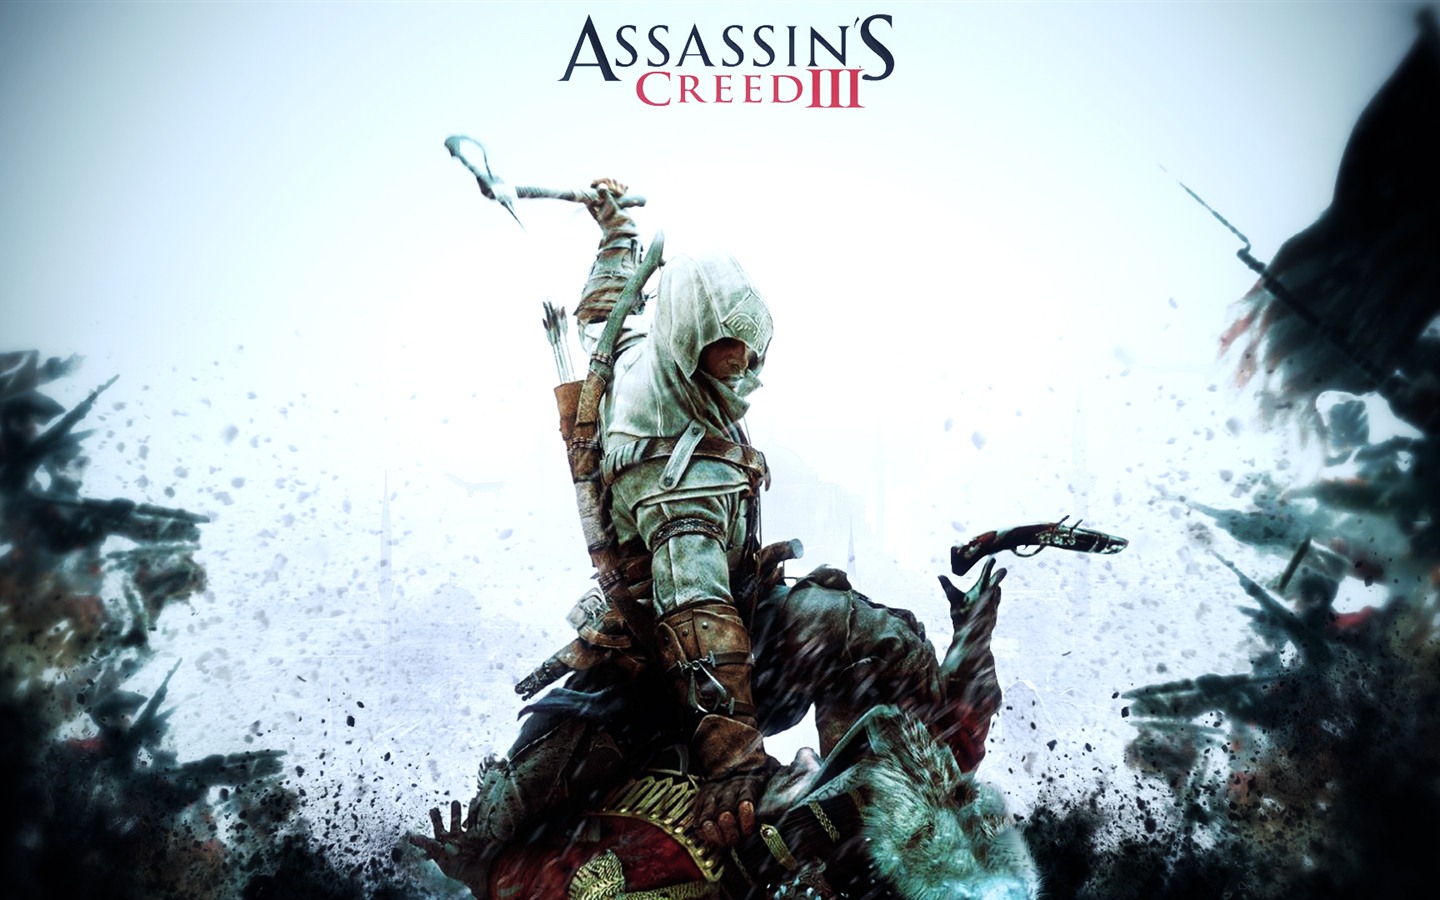 Assassin's Creed 3 HD wallpapers #15 - 1440x900